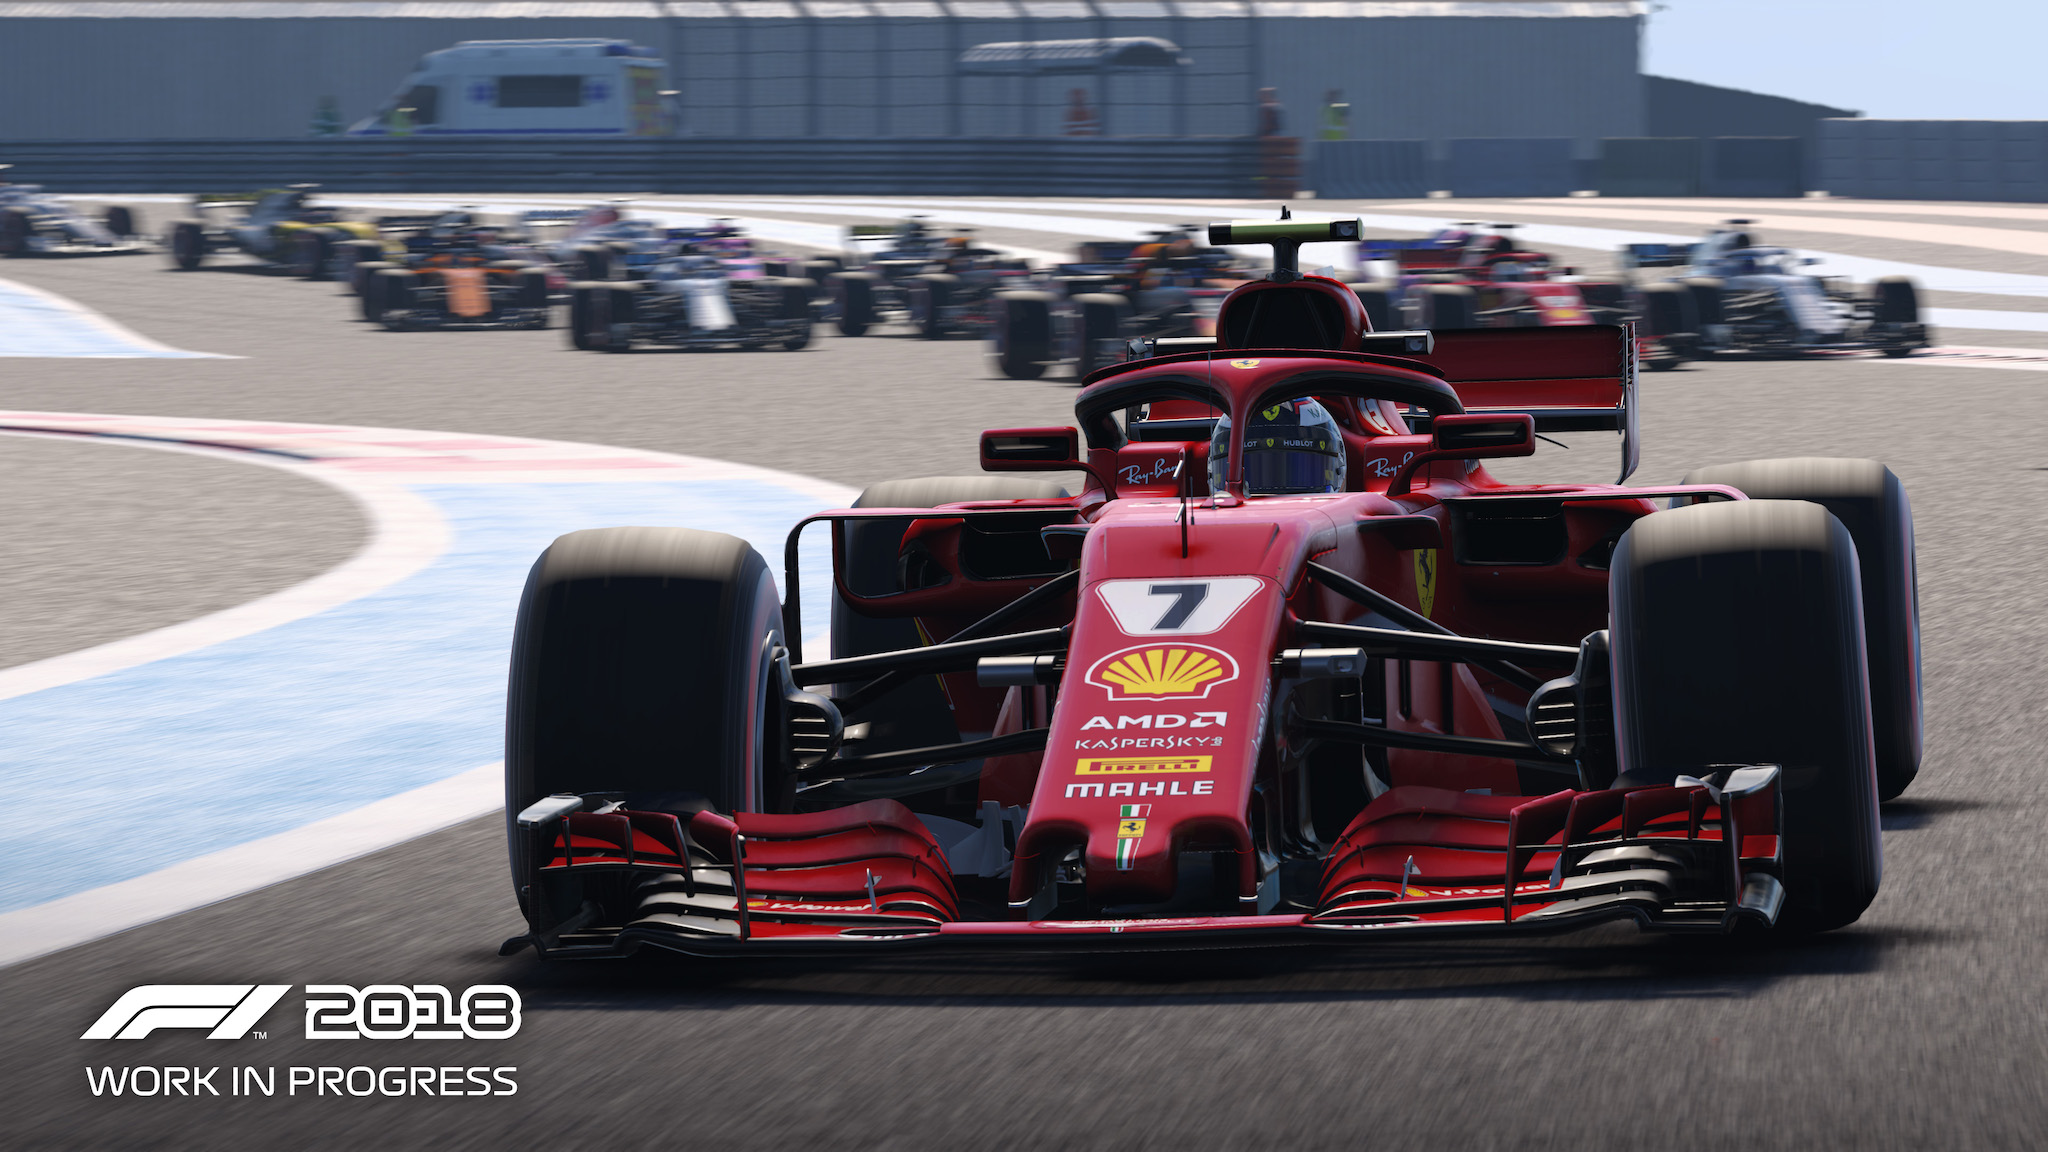 F1 2018: More than a great game, it's an interactive history Ars Technica